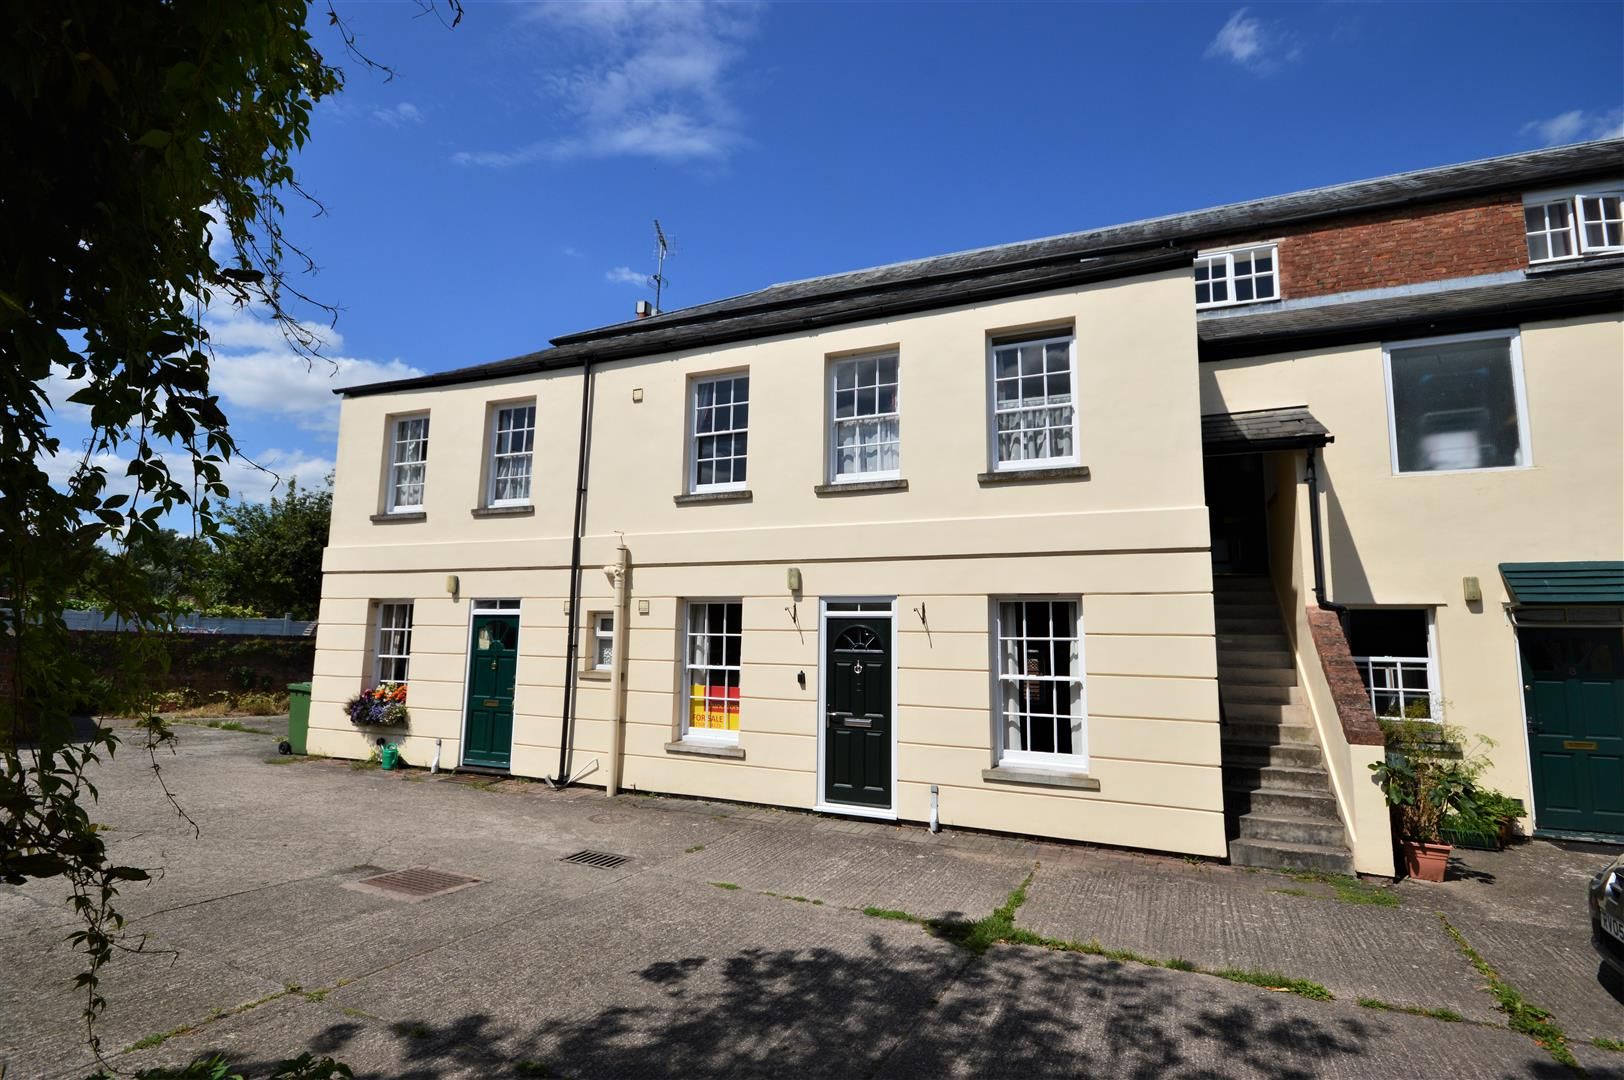 1 bed flat for sale in Leominster - Property Image 1